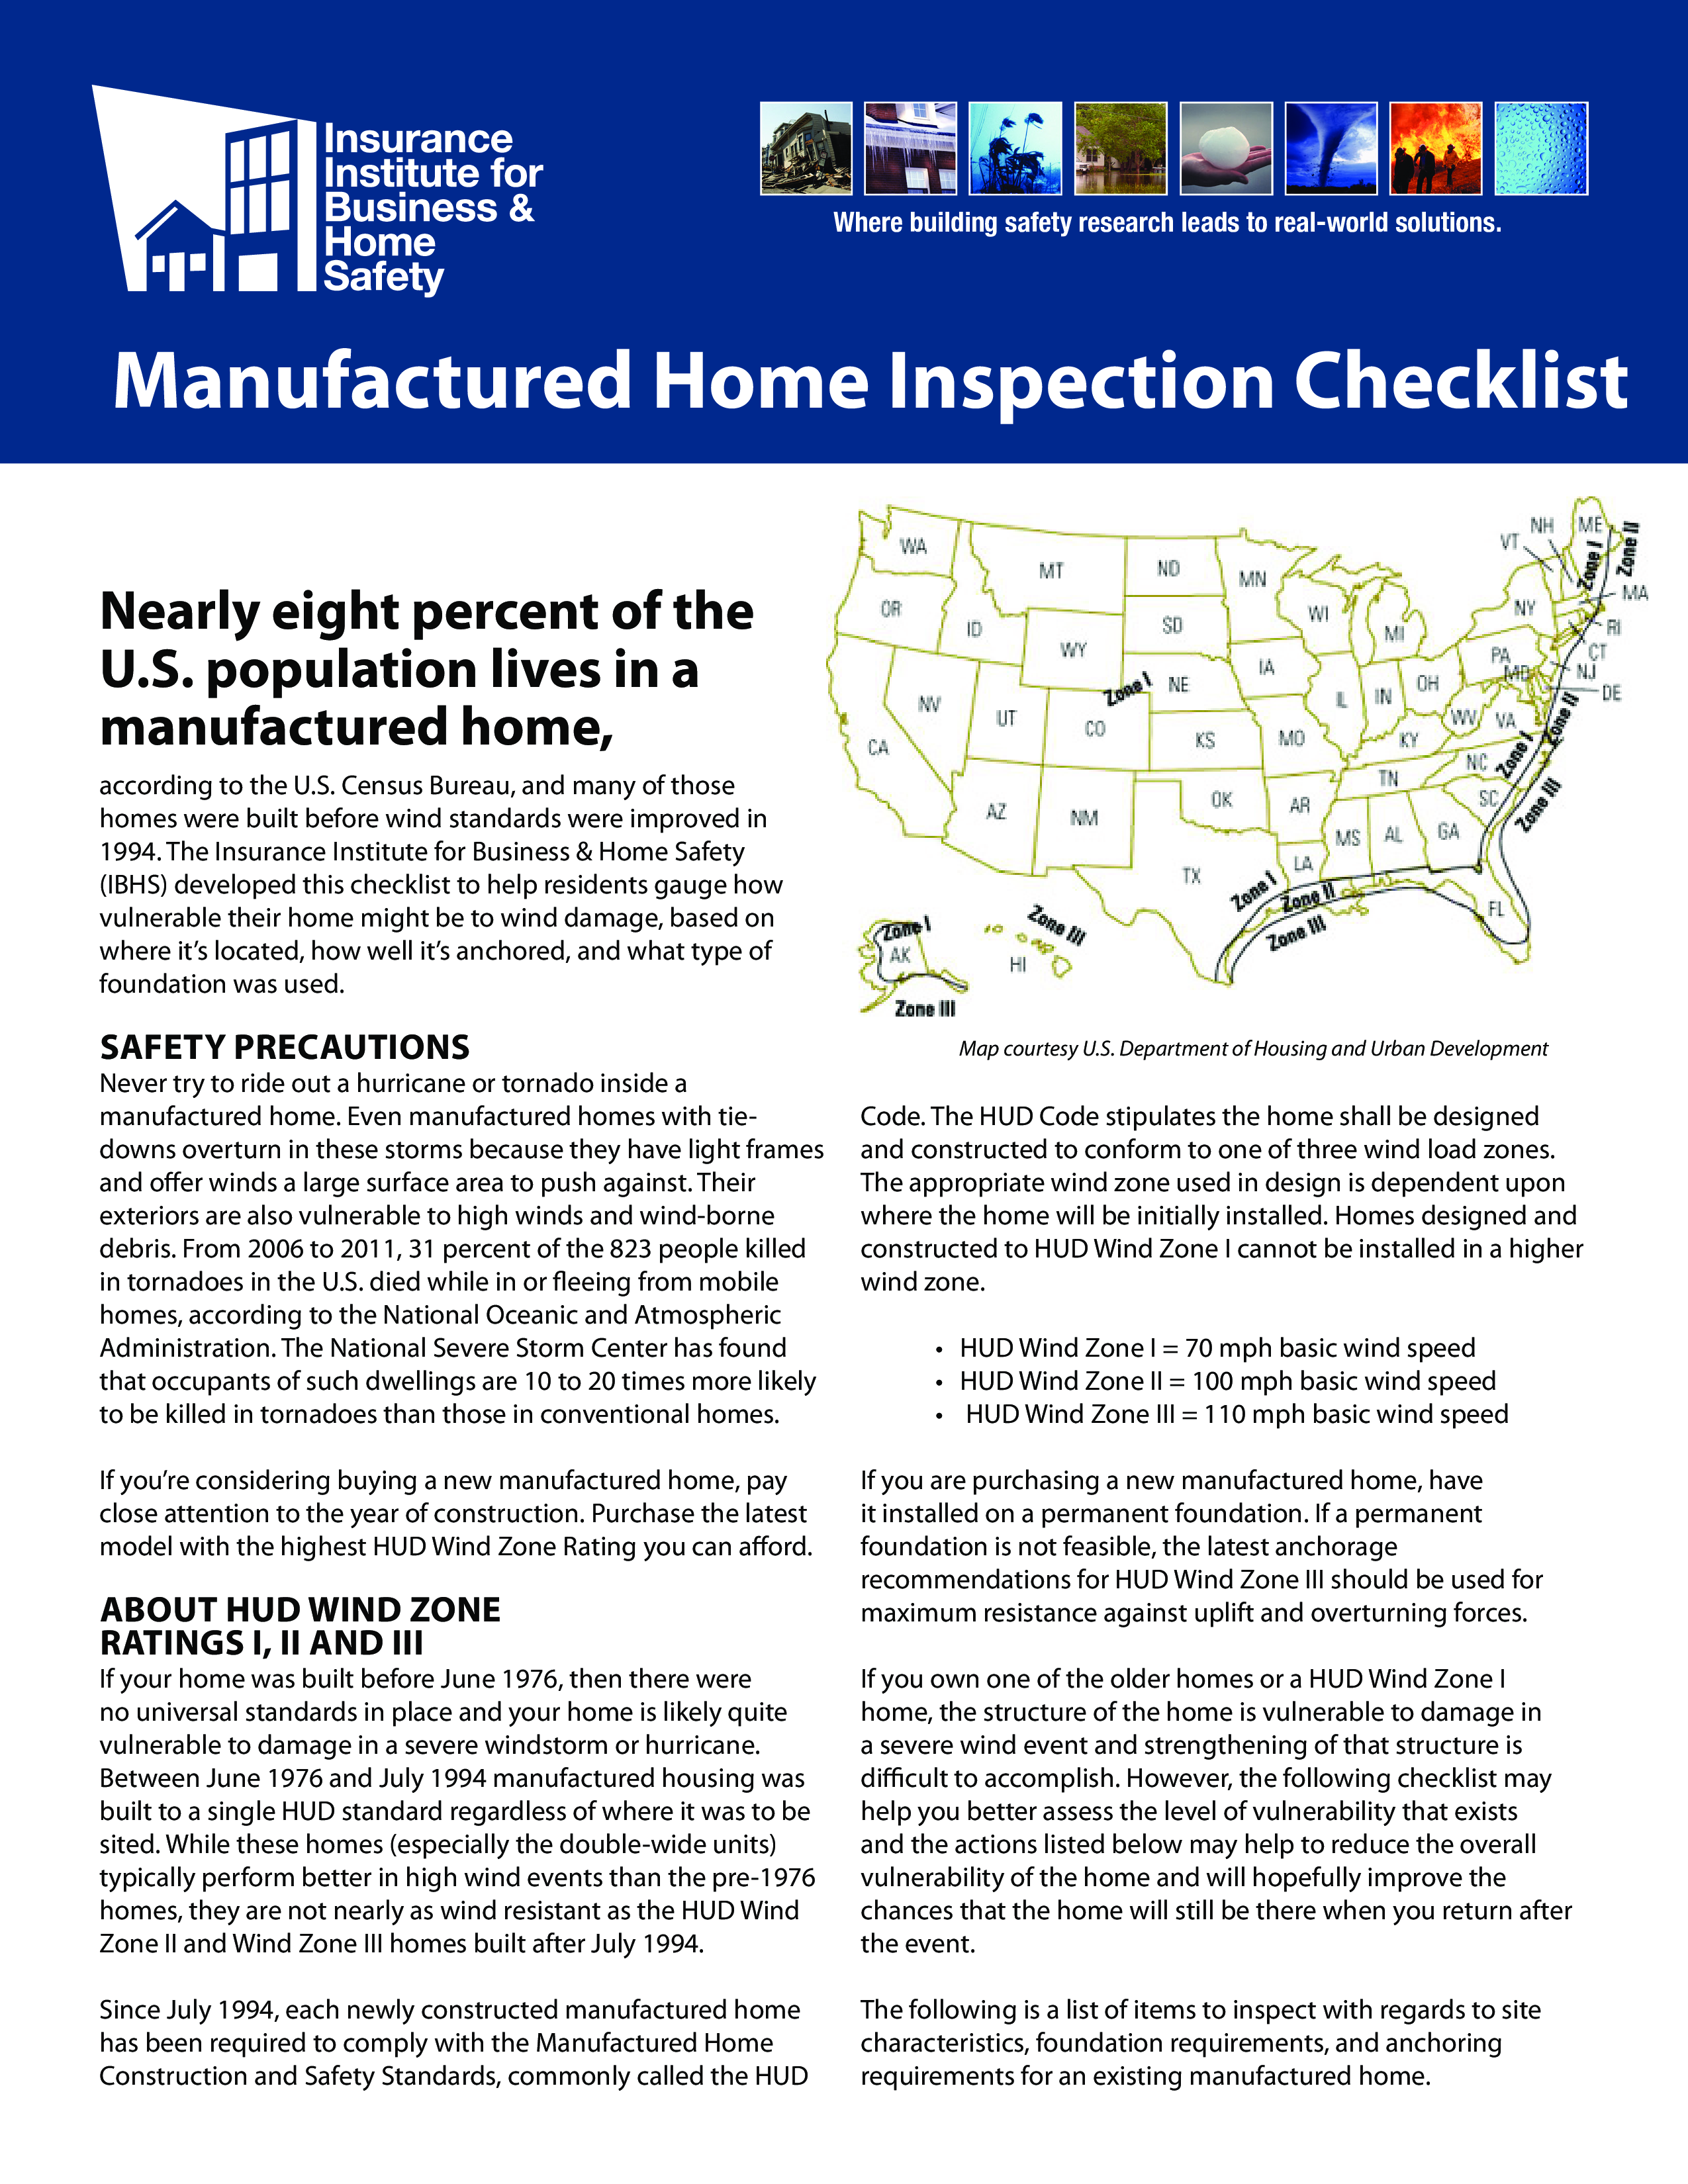 Manufactured Home Inspection Checklist main image